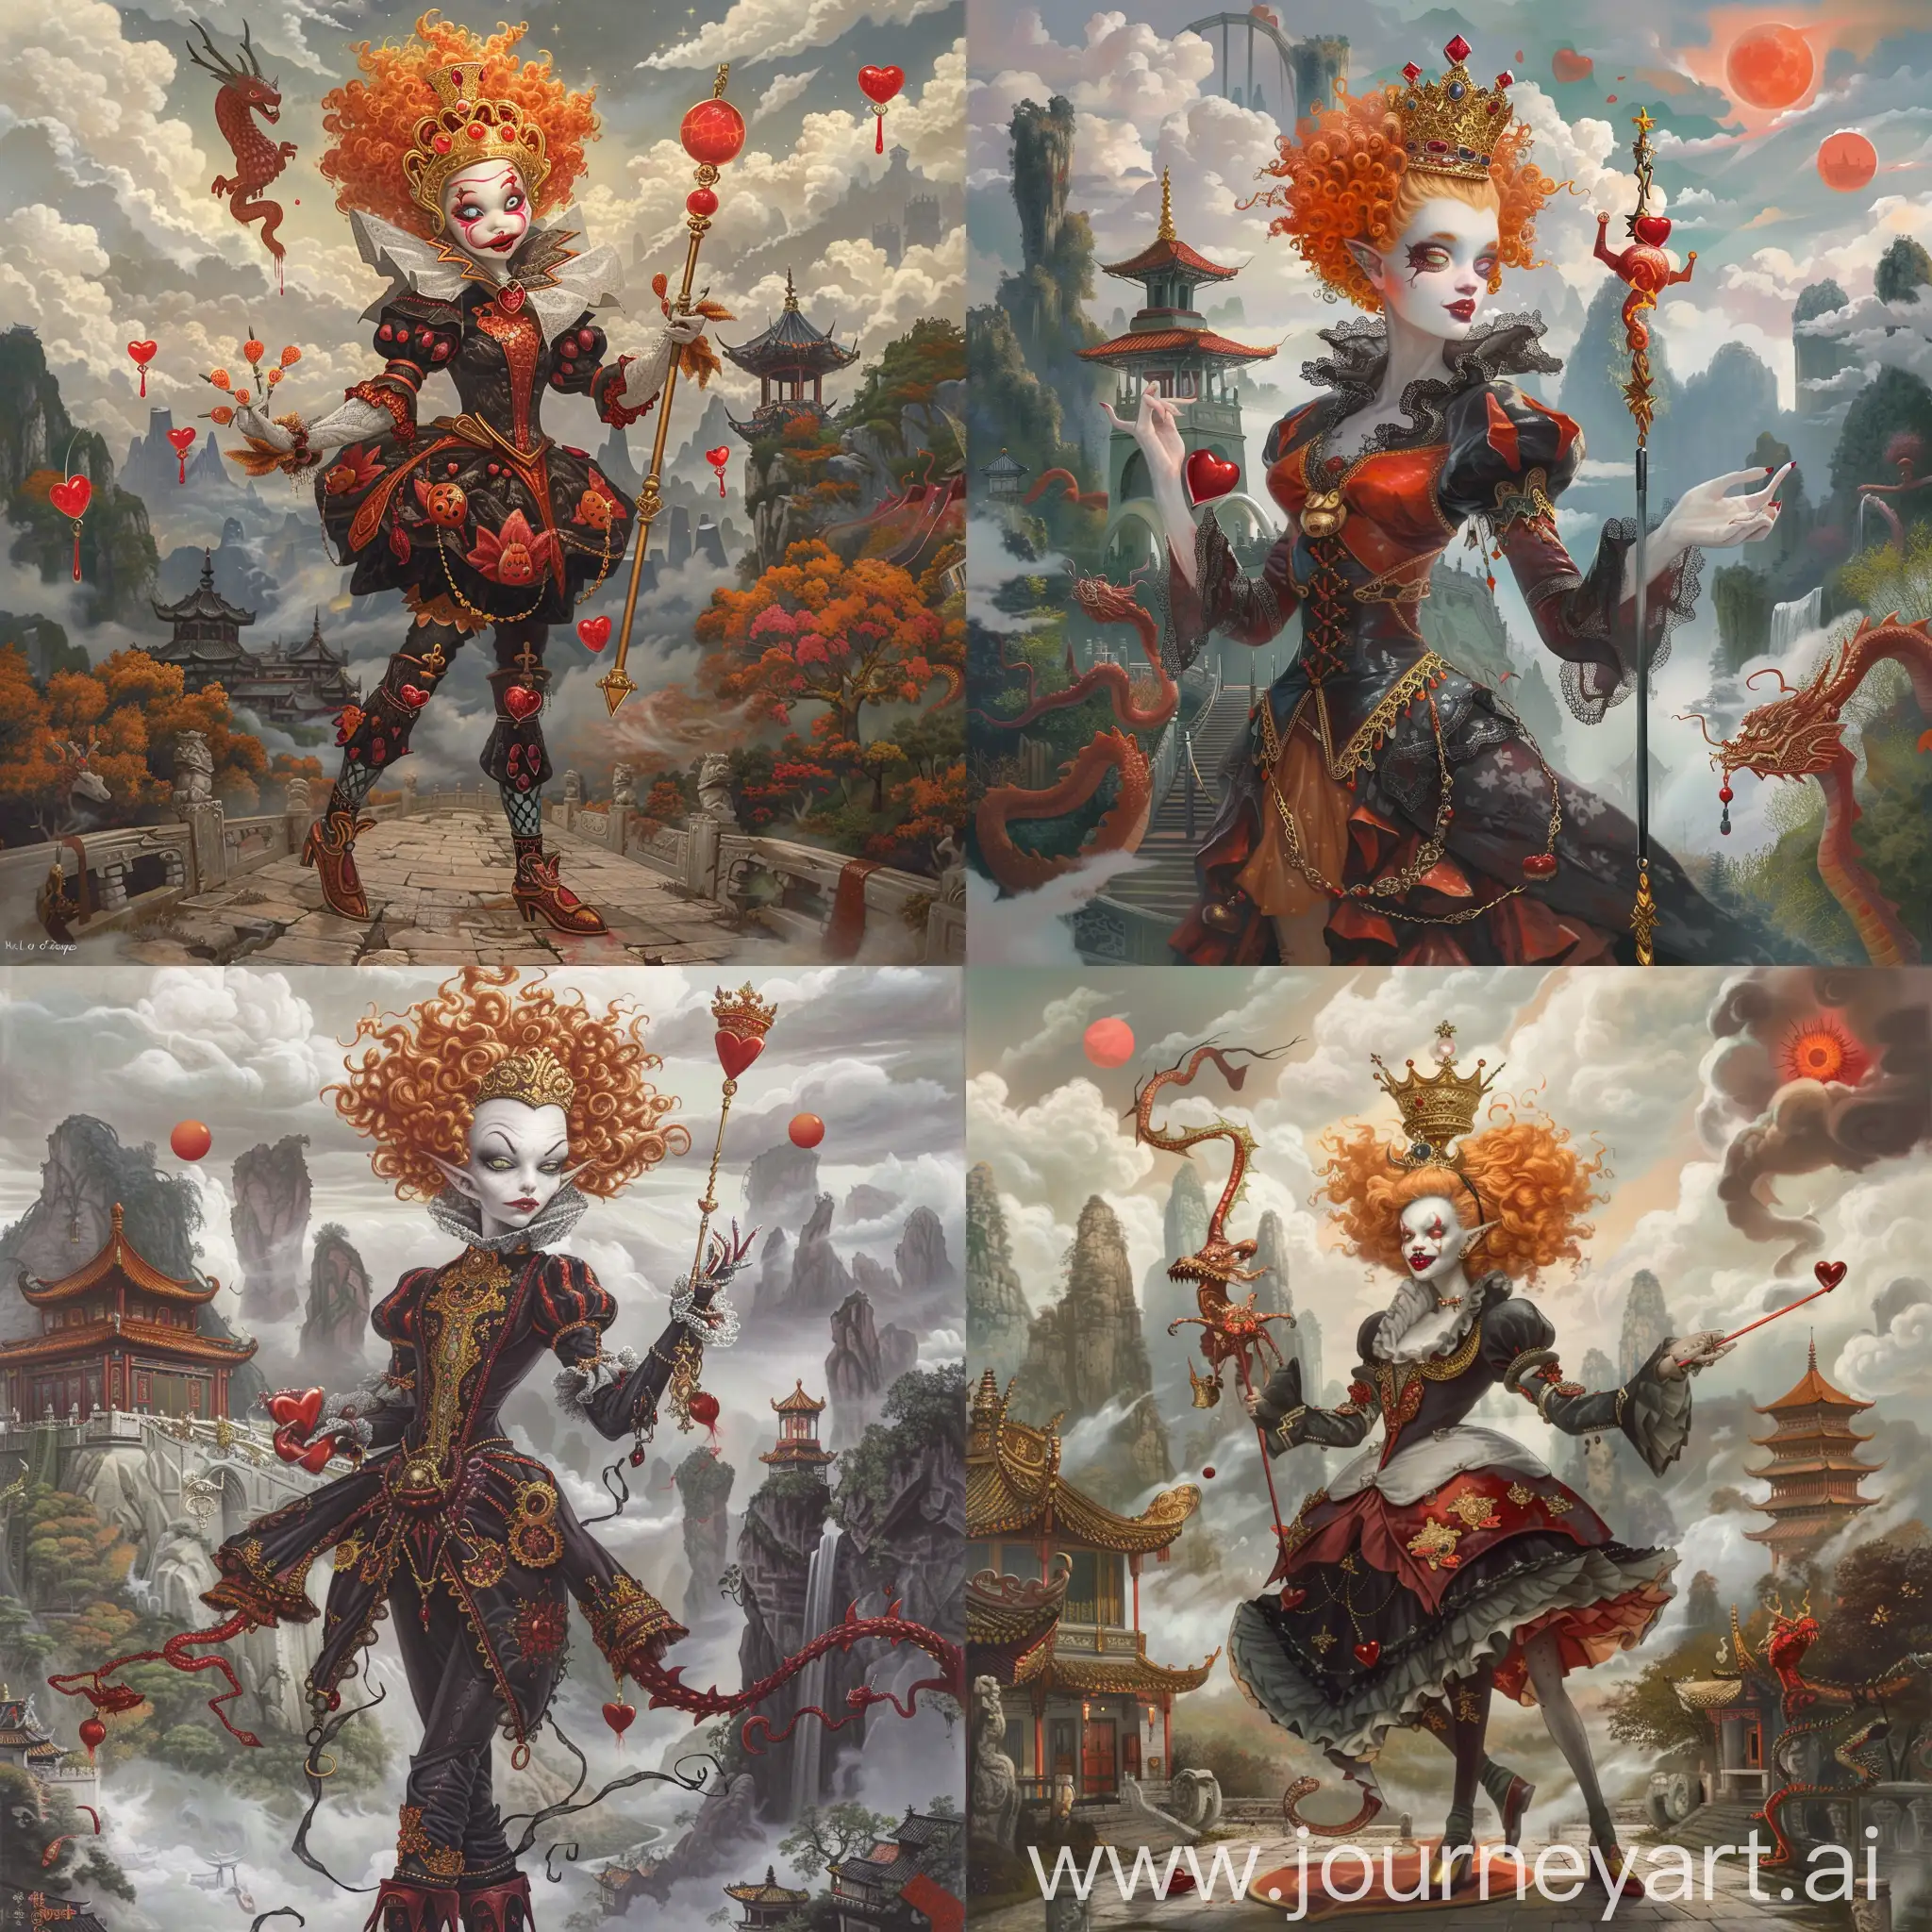 Sinister-Disney-Queen-Of-Hearts-with-Royal-Wand-in-Chinese-Empress-Attire-Amidst-Icy-Dragons-and-Red-Suns